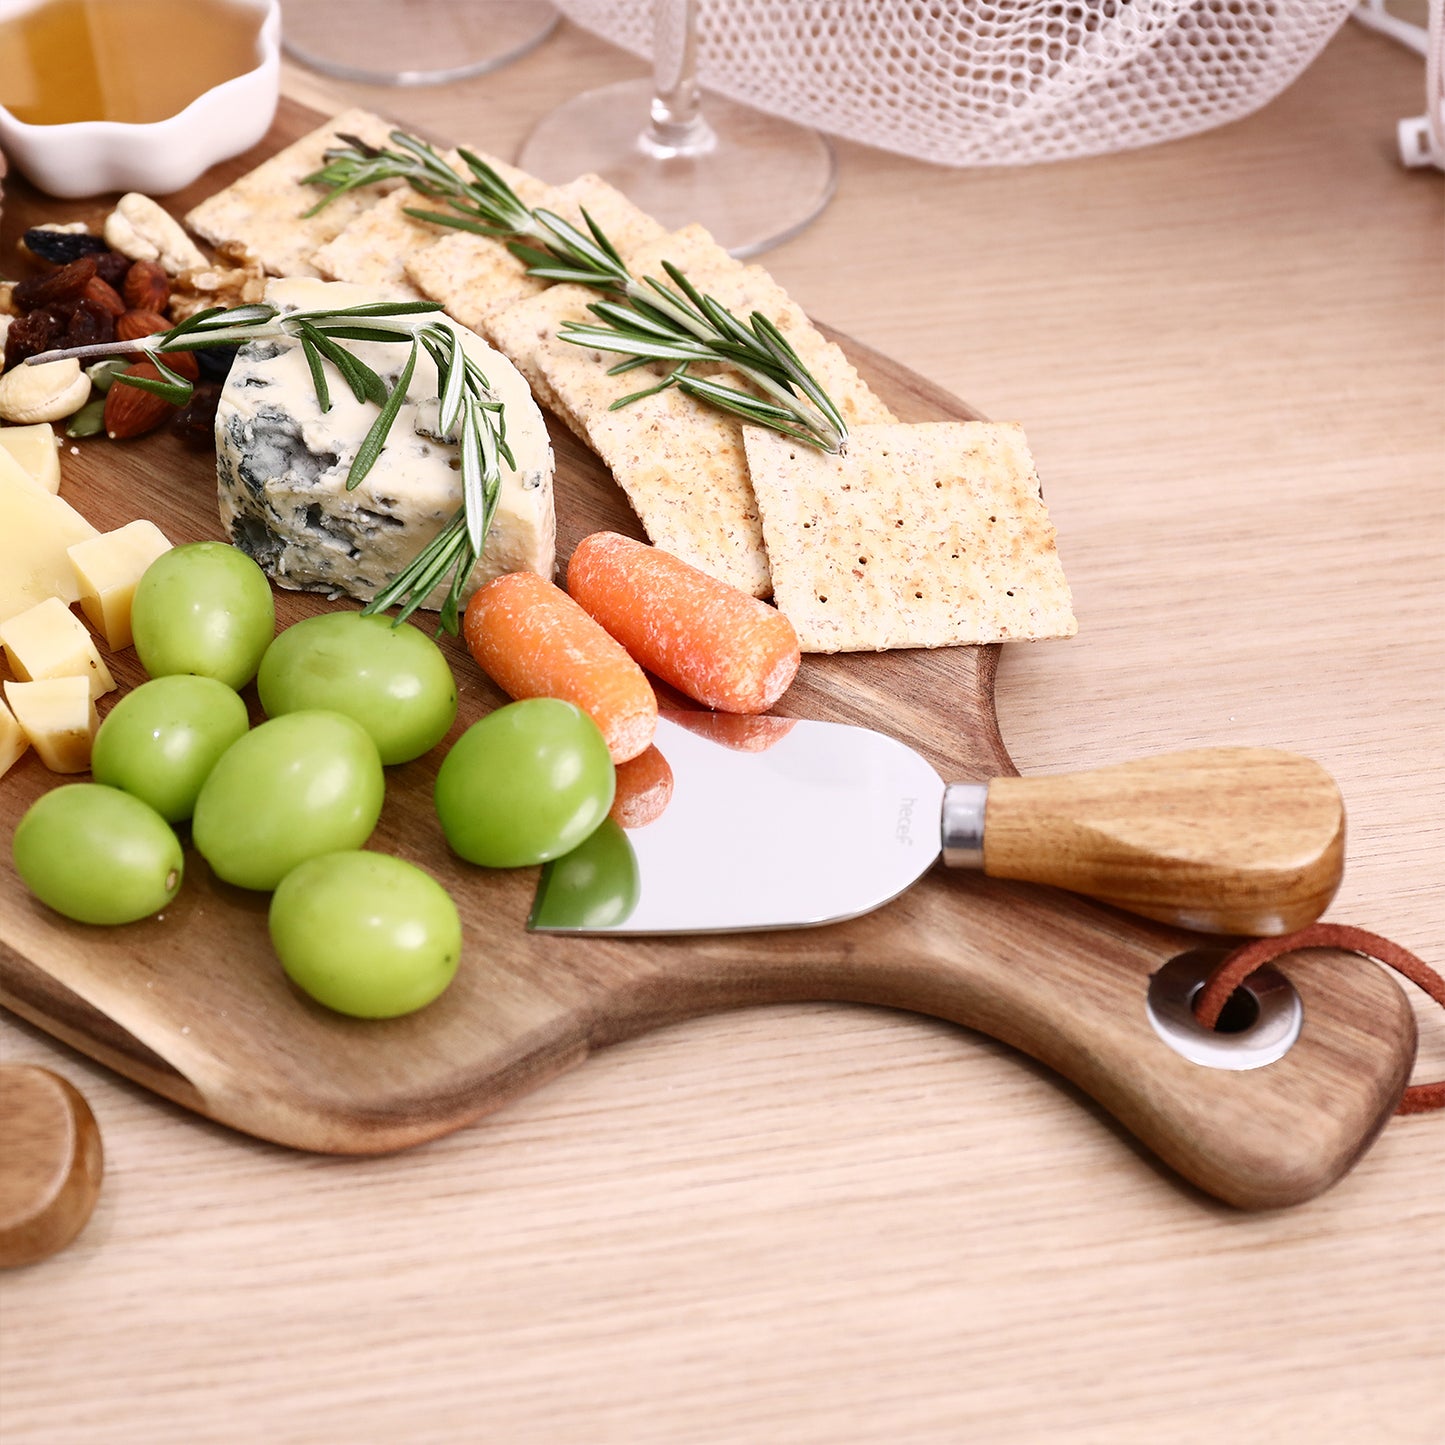 Upgrade 4 Pcs Acacia Wood Cheese Cutting Charcuterie Board Meat Fruit & Crackers - Hecef Kitchen